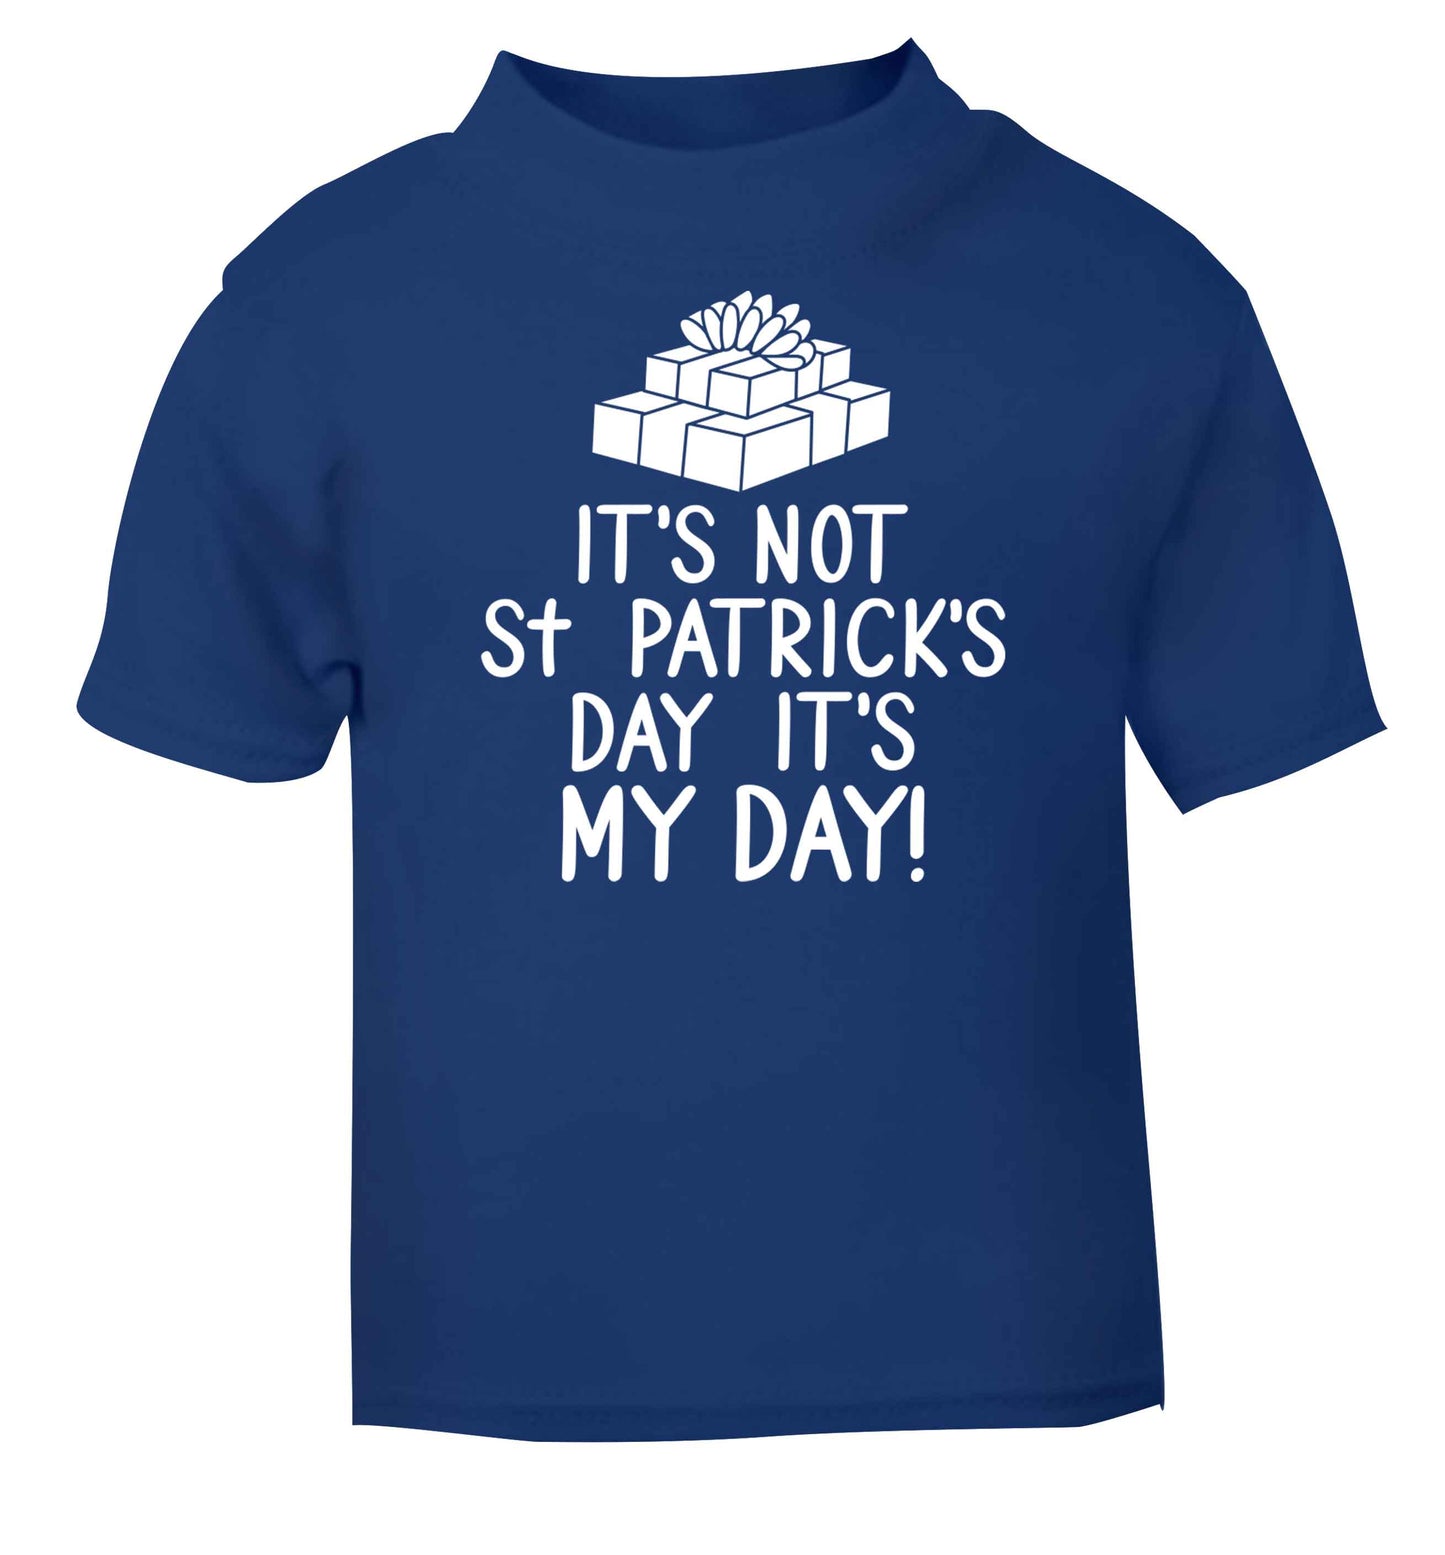 Funny gifts for your mum on mother's dayor her birthday! It's not St Patricks day it's my day blue baby toddler Tshirt 2 Years